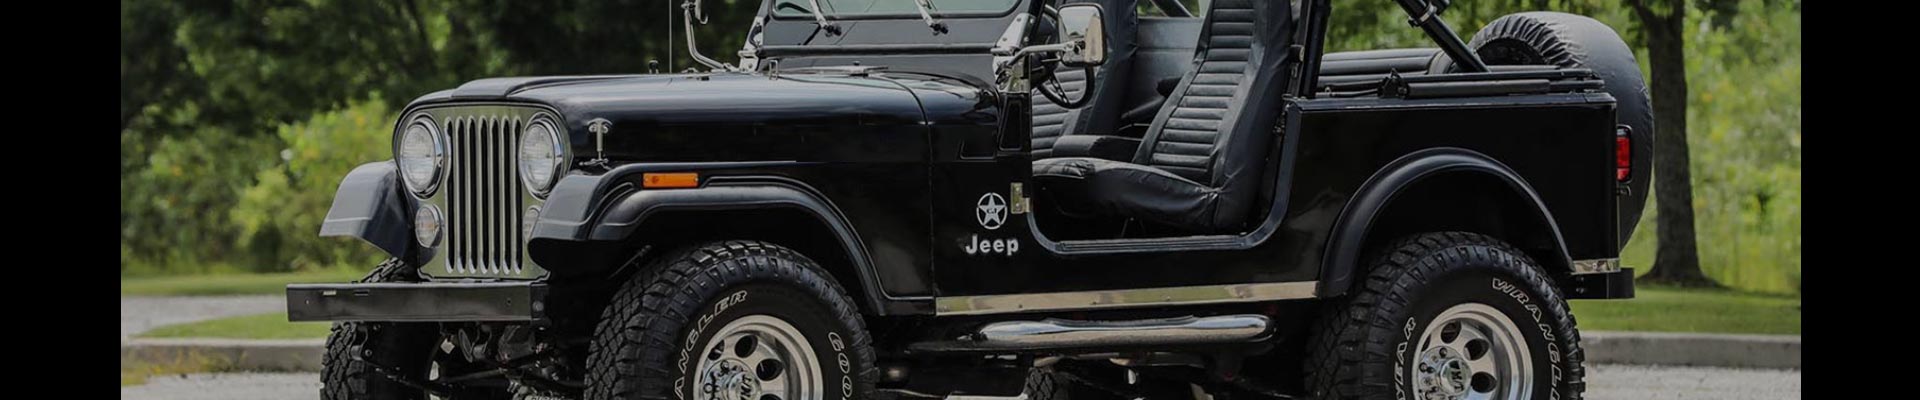 Shop Replacement and OEM 1985 Jeep CJ7 Parts with Discounted Price on the Net